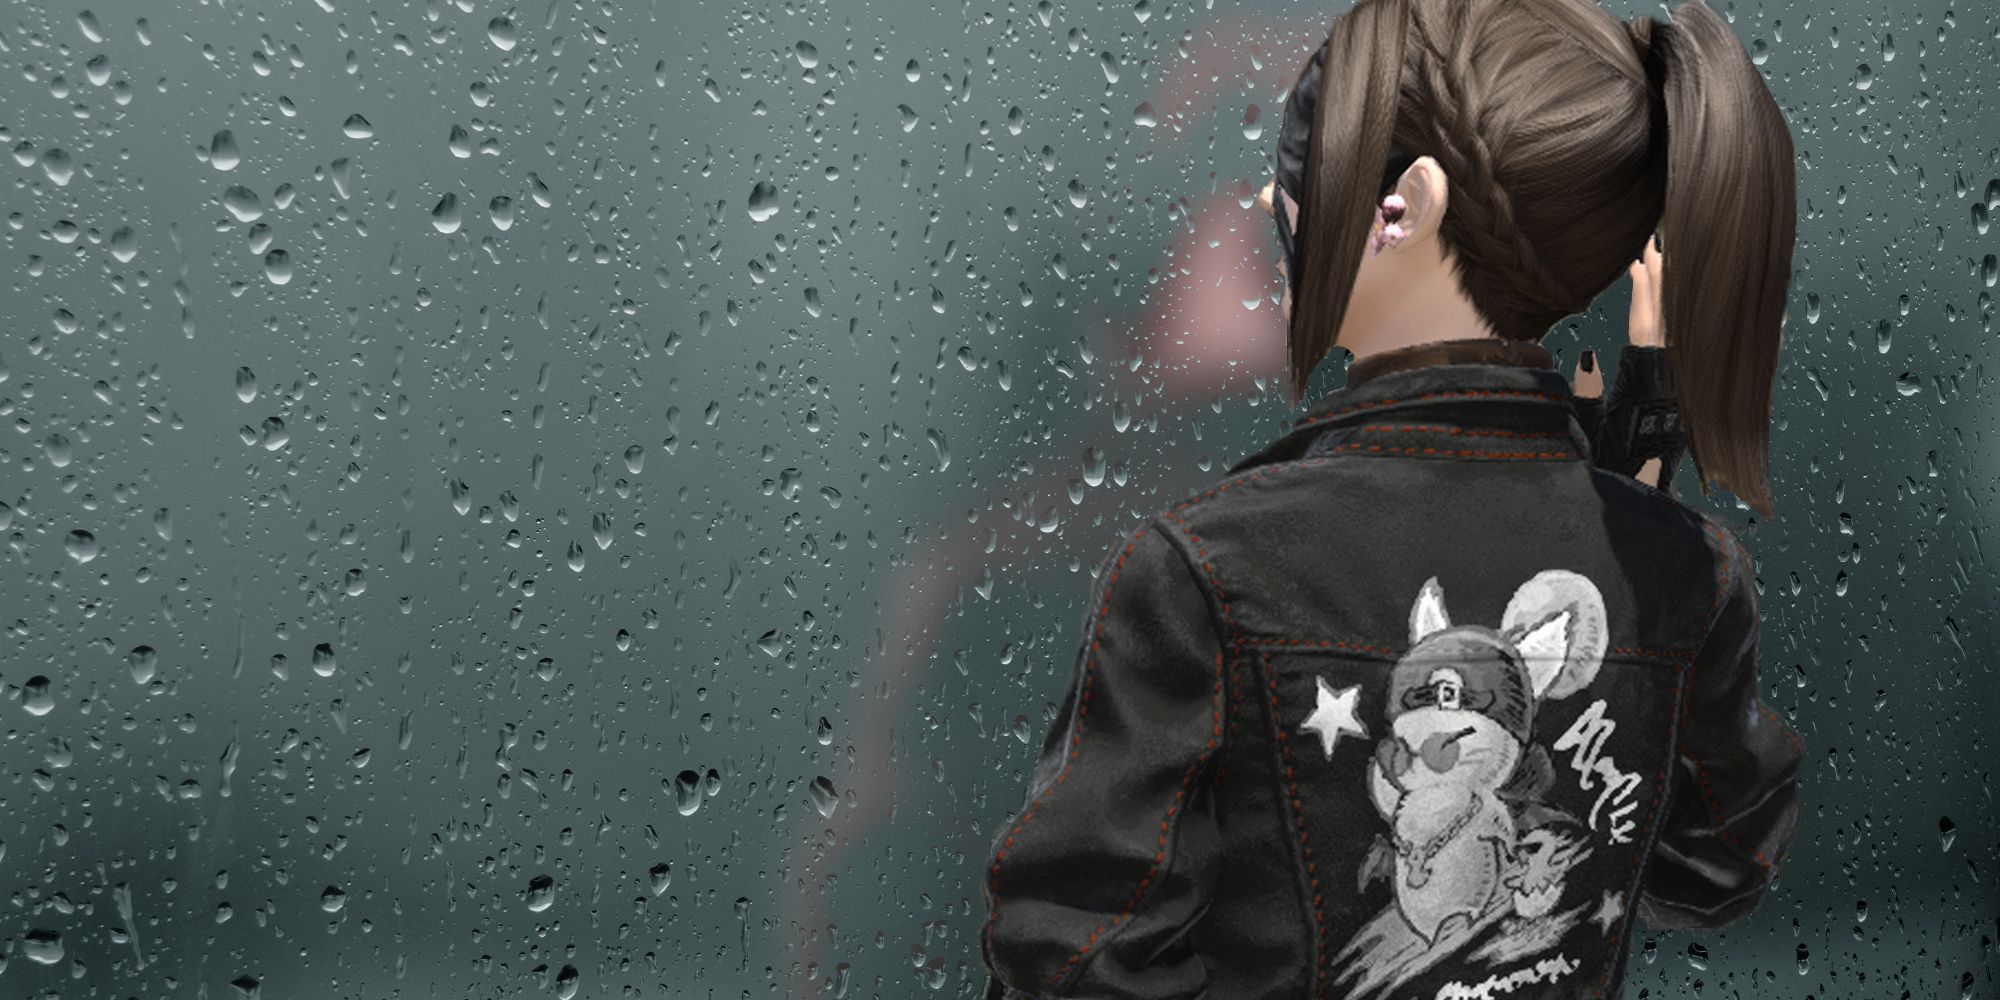 Final Fantasy 14 player staring out of a rainy window meme